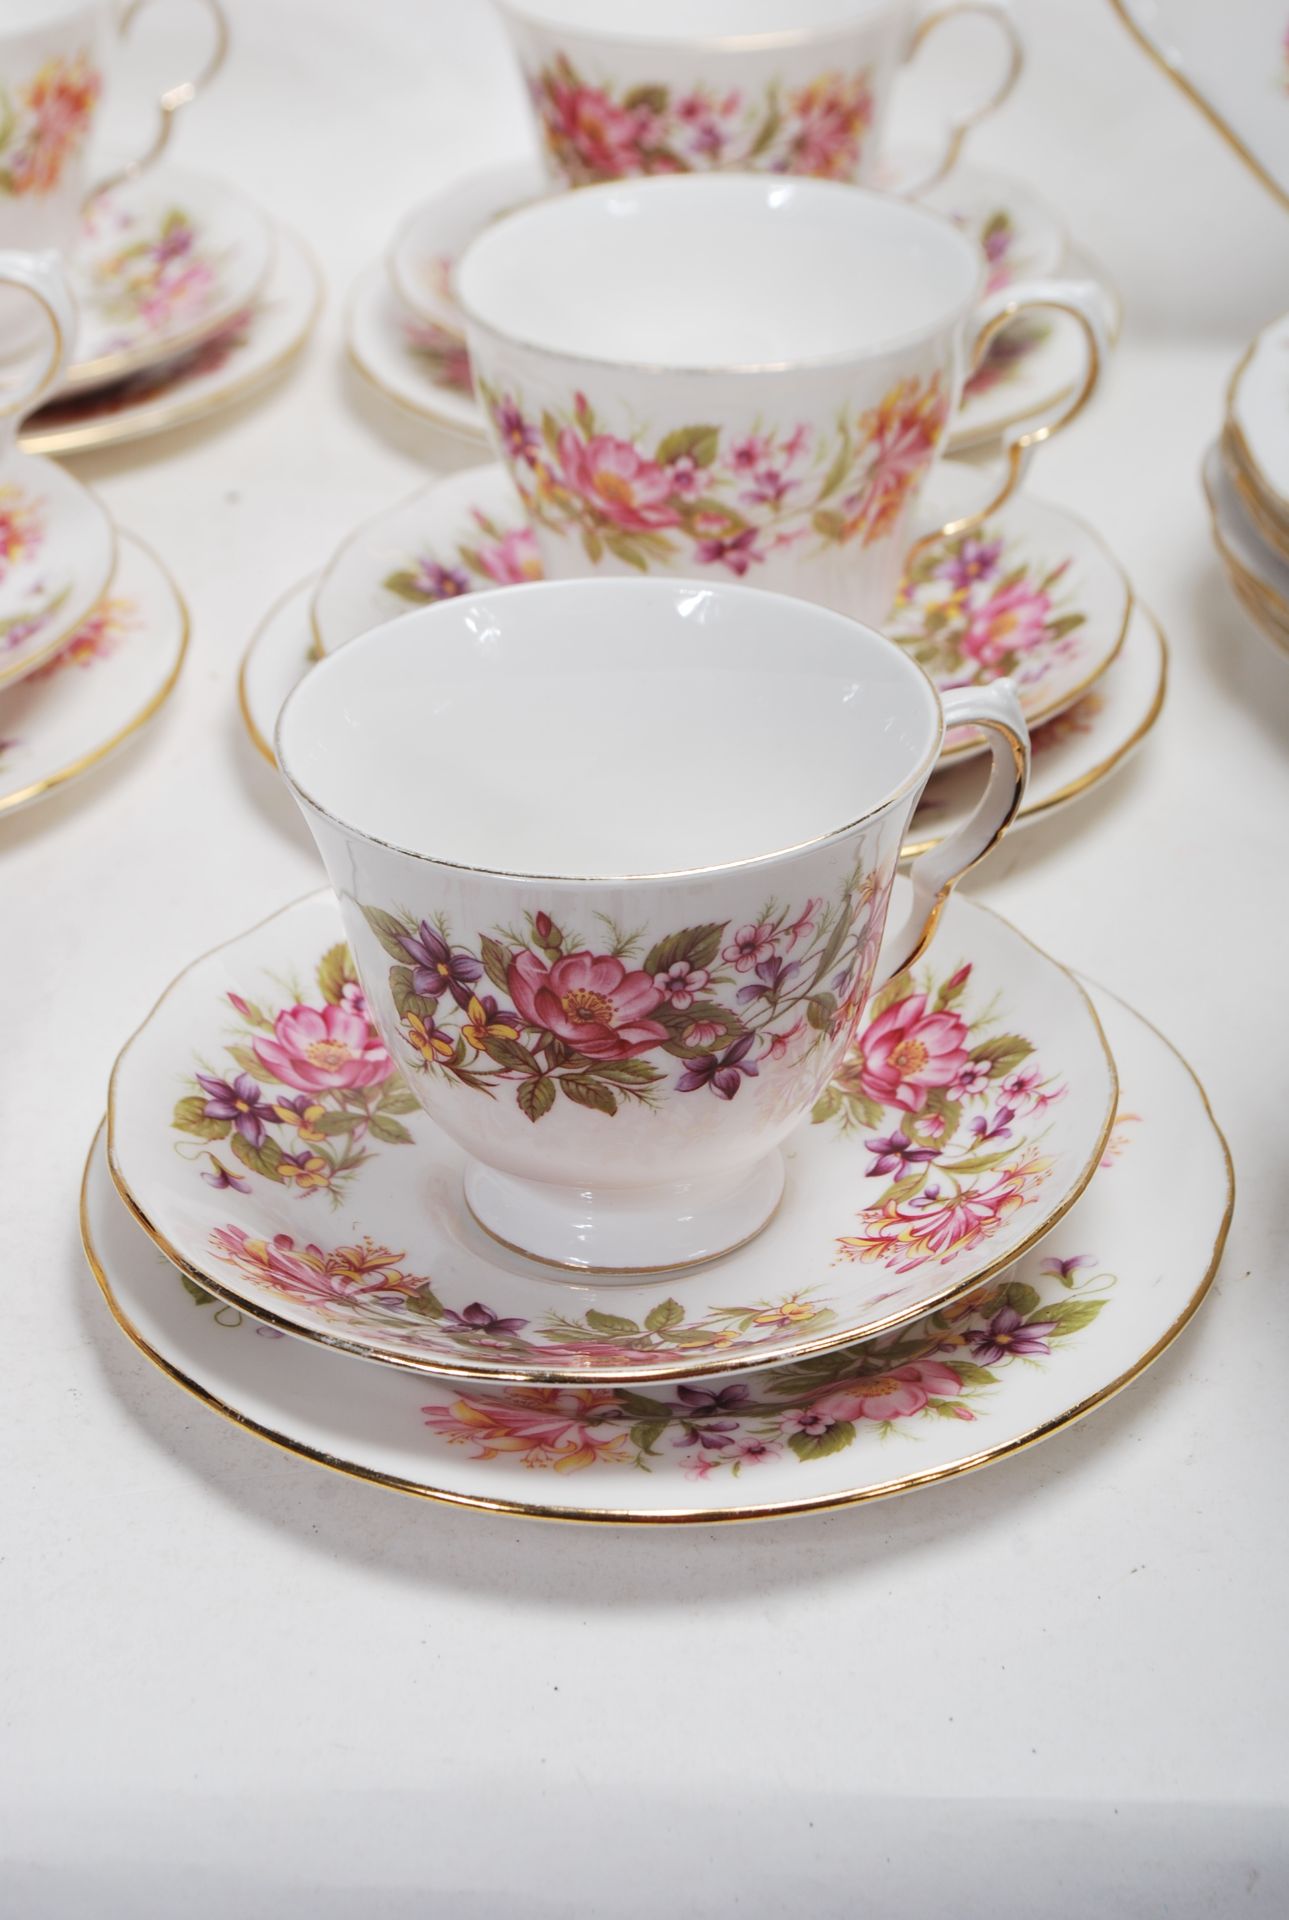 COLCLOUGH WAYSIDE PATTERN DINNER SERVICE - Image 5 of 12